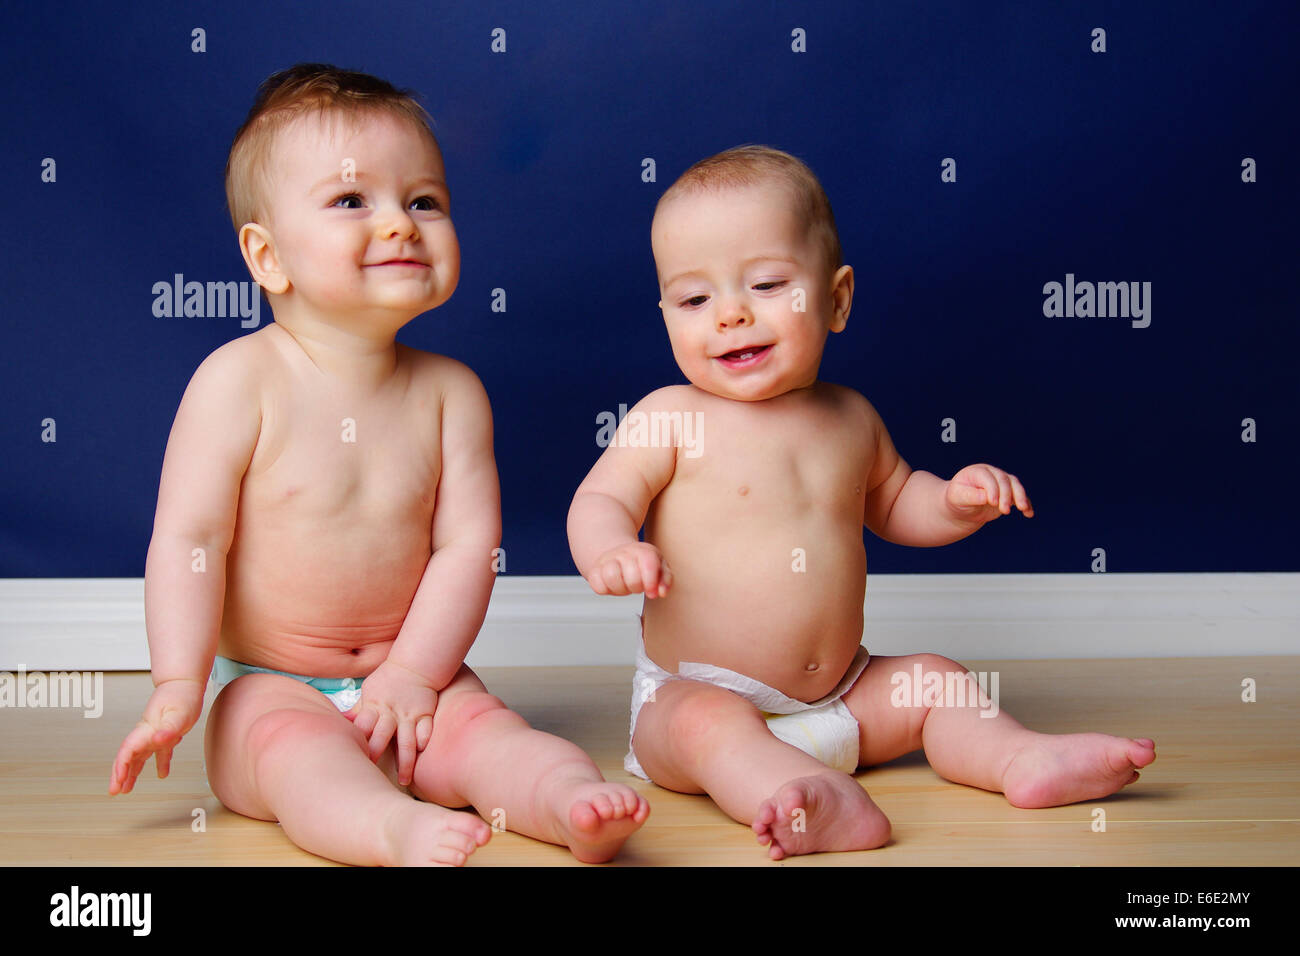 Twin 9 month old babies grinning and sitting up Stock Photo